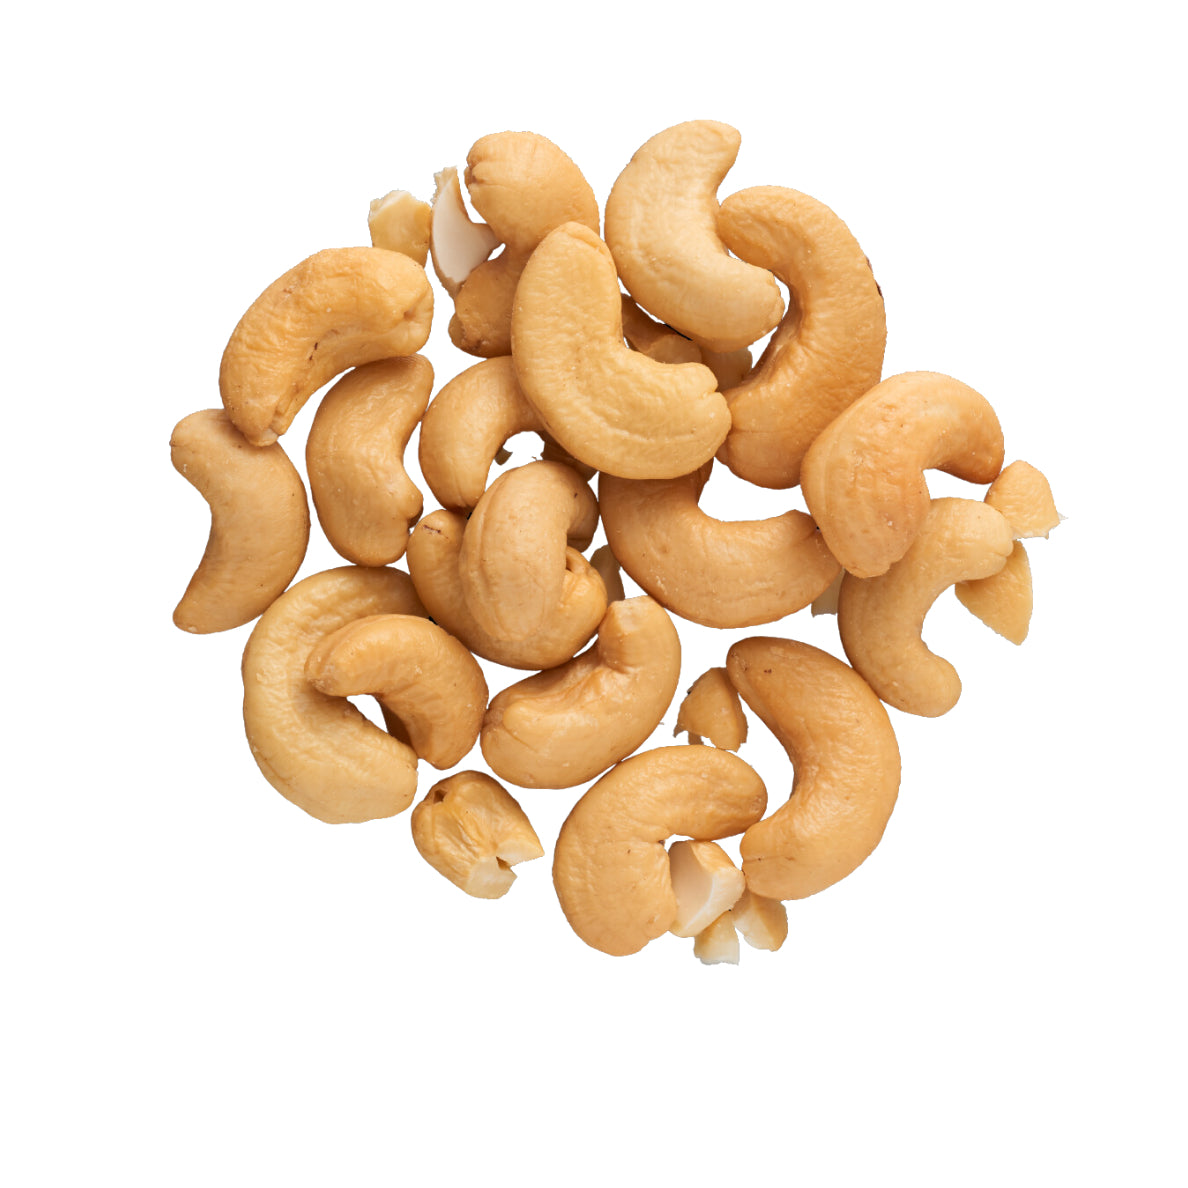 CASHEW WHOLE ROASTED AND UNSALTED